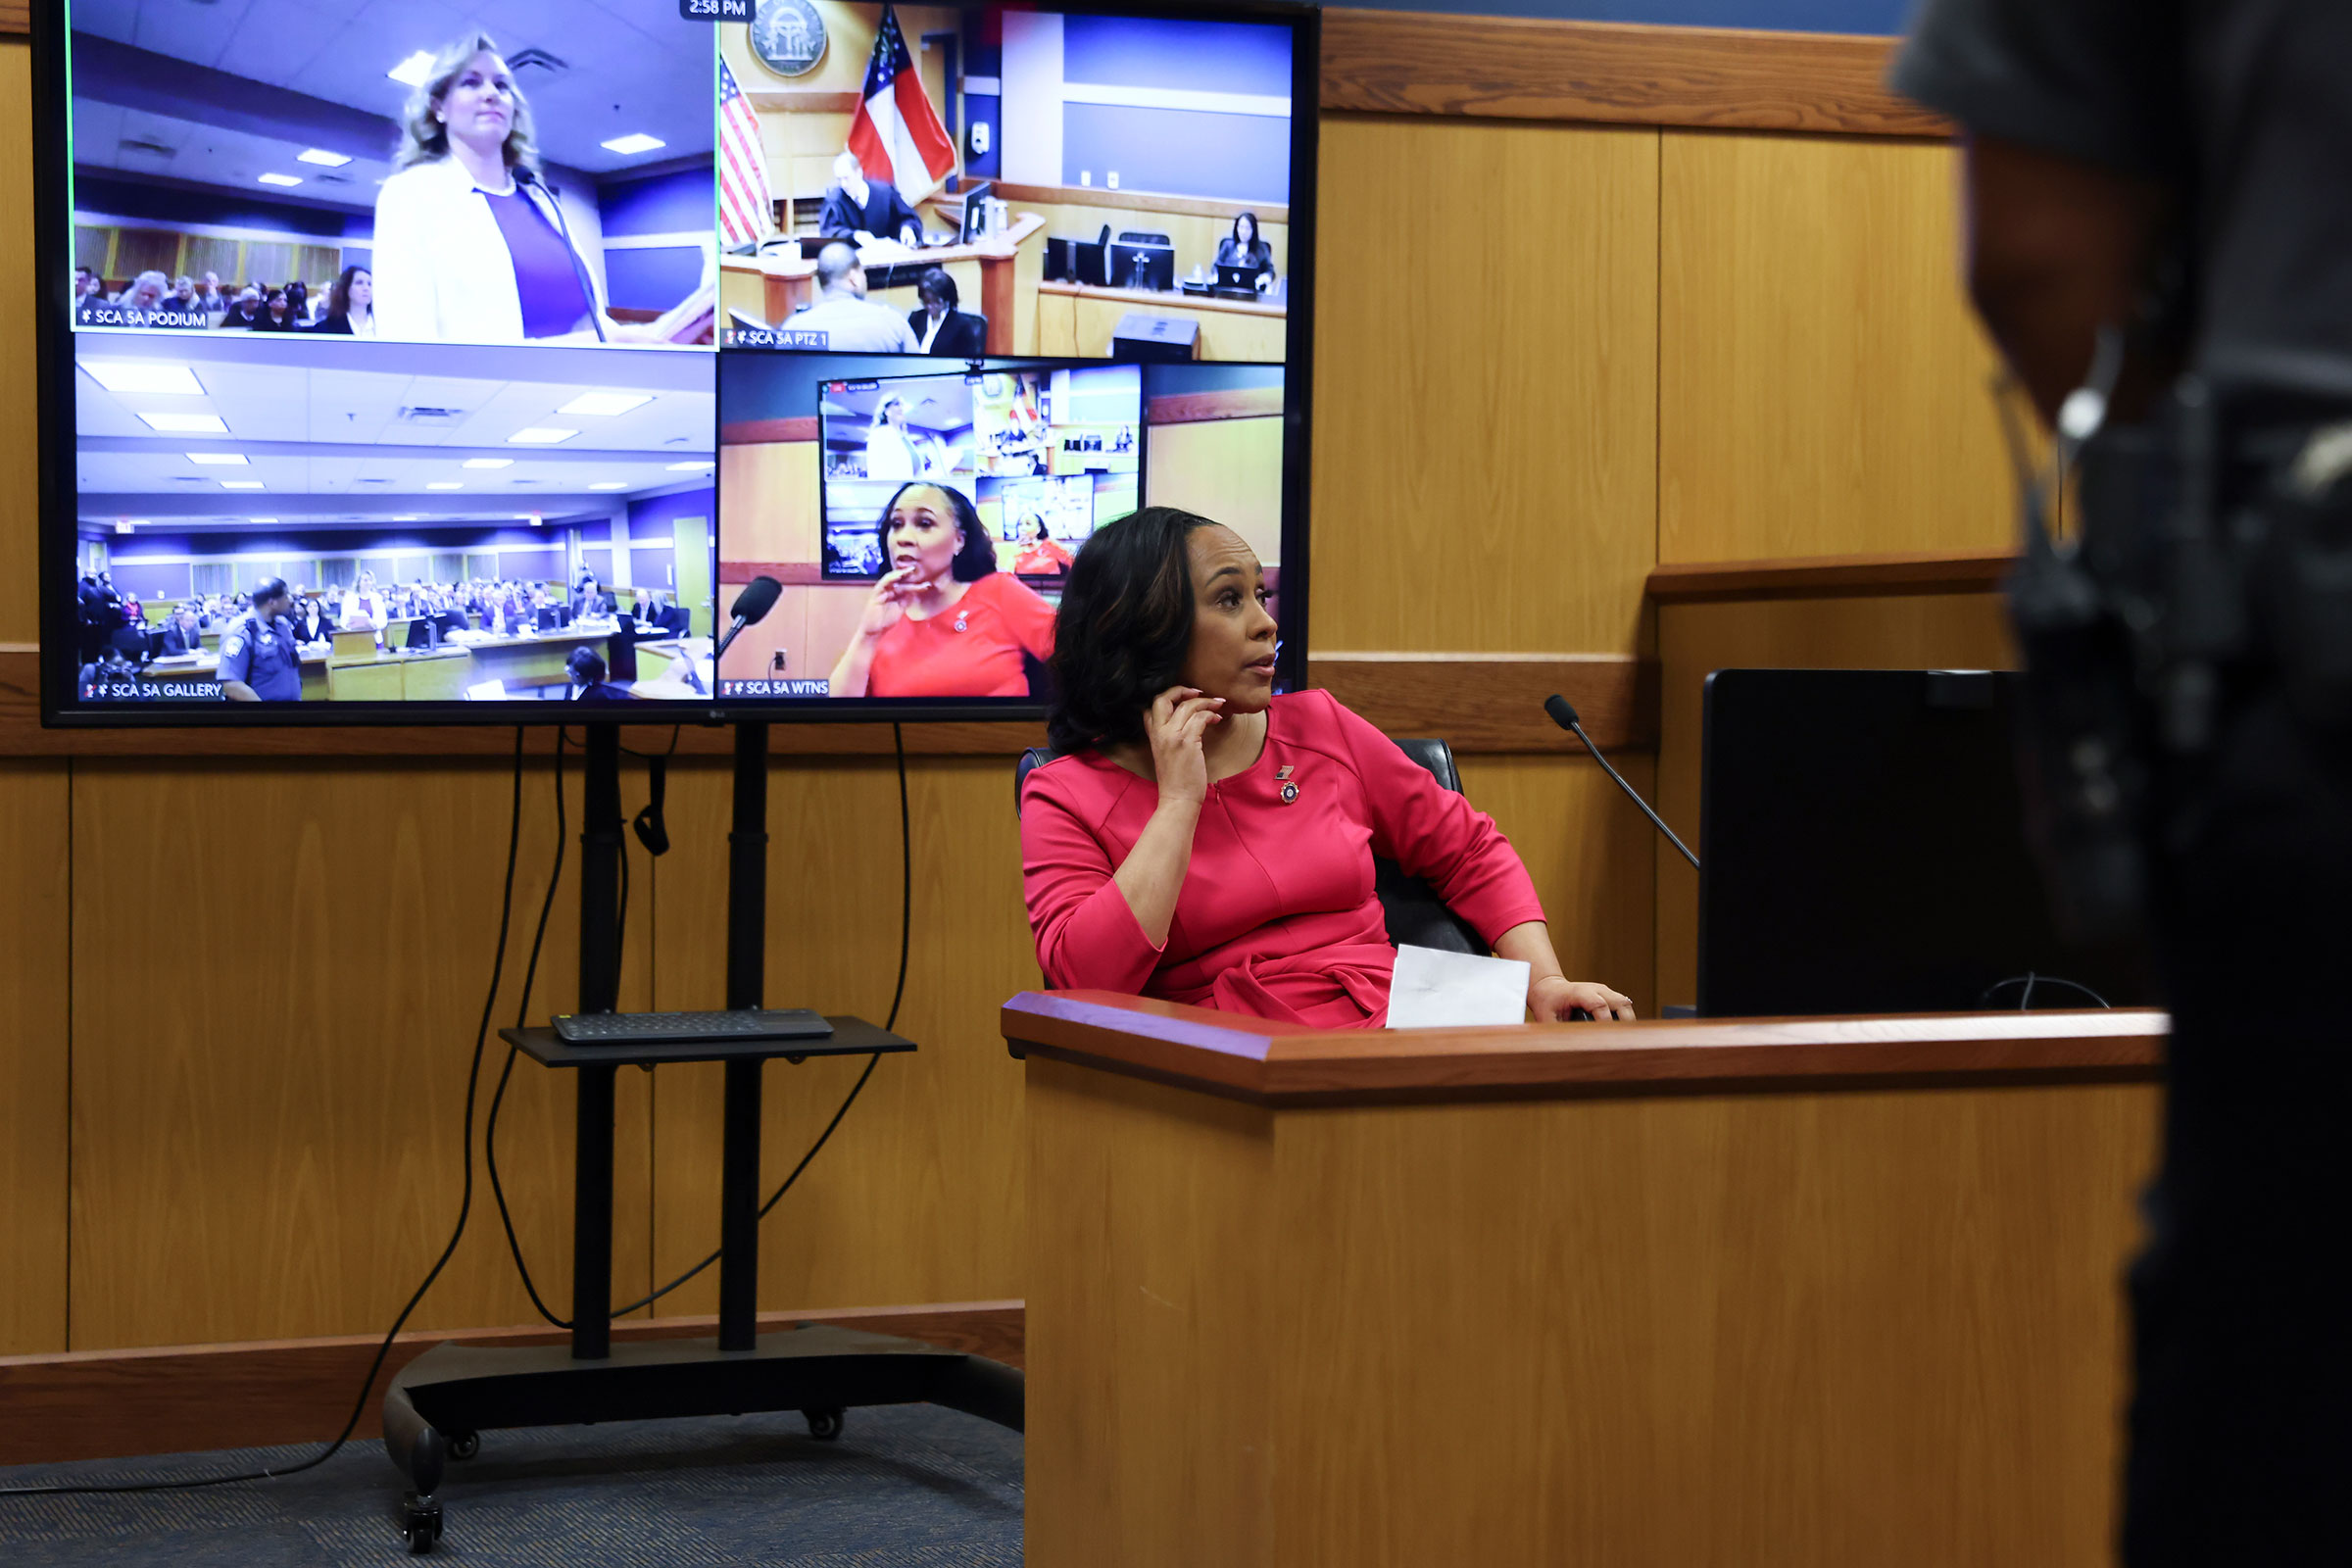 Fulton County District Attorney Fani Willis testifies during a hearing in the case of the State of Georgia v. Donald John Trump at the Fulton County Courthouse on February 15 in Atlanta, Georgia.